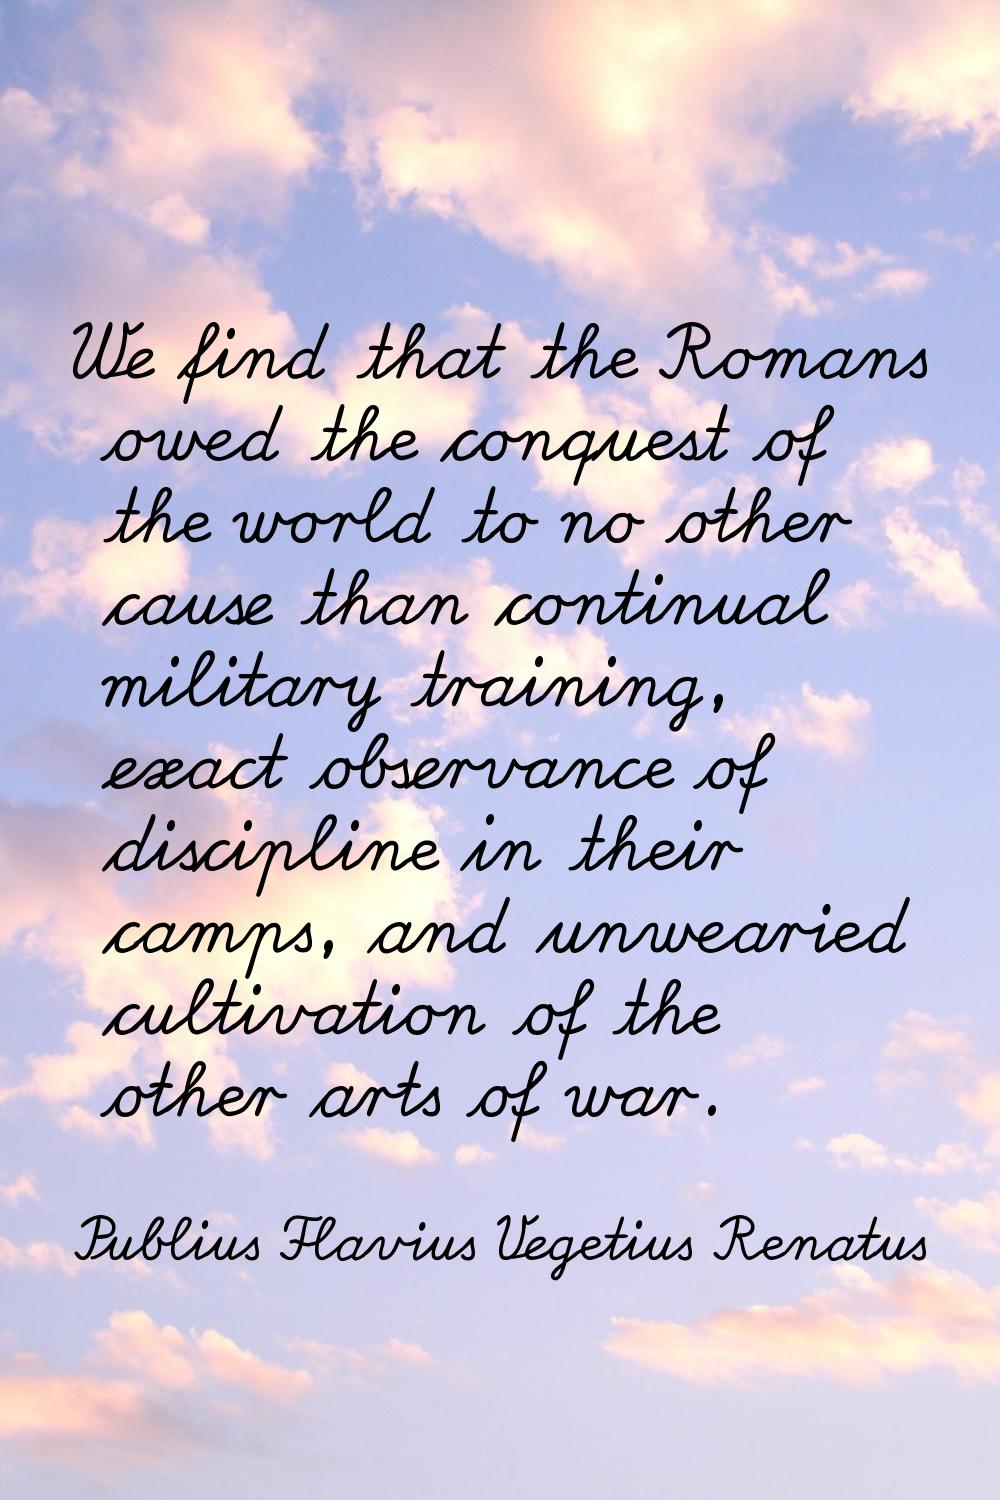 We find that the Romans owed the conquest of the world to no other cause than continual military tr